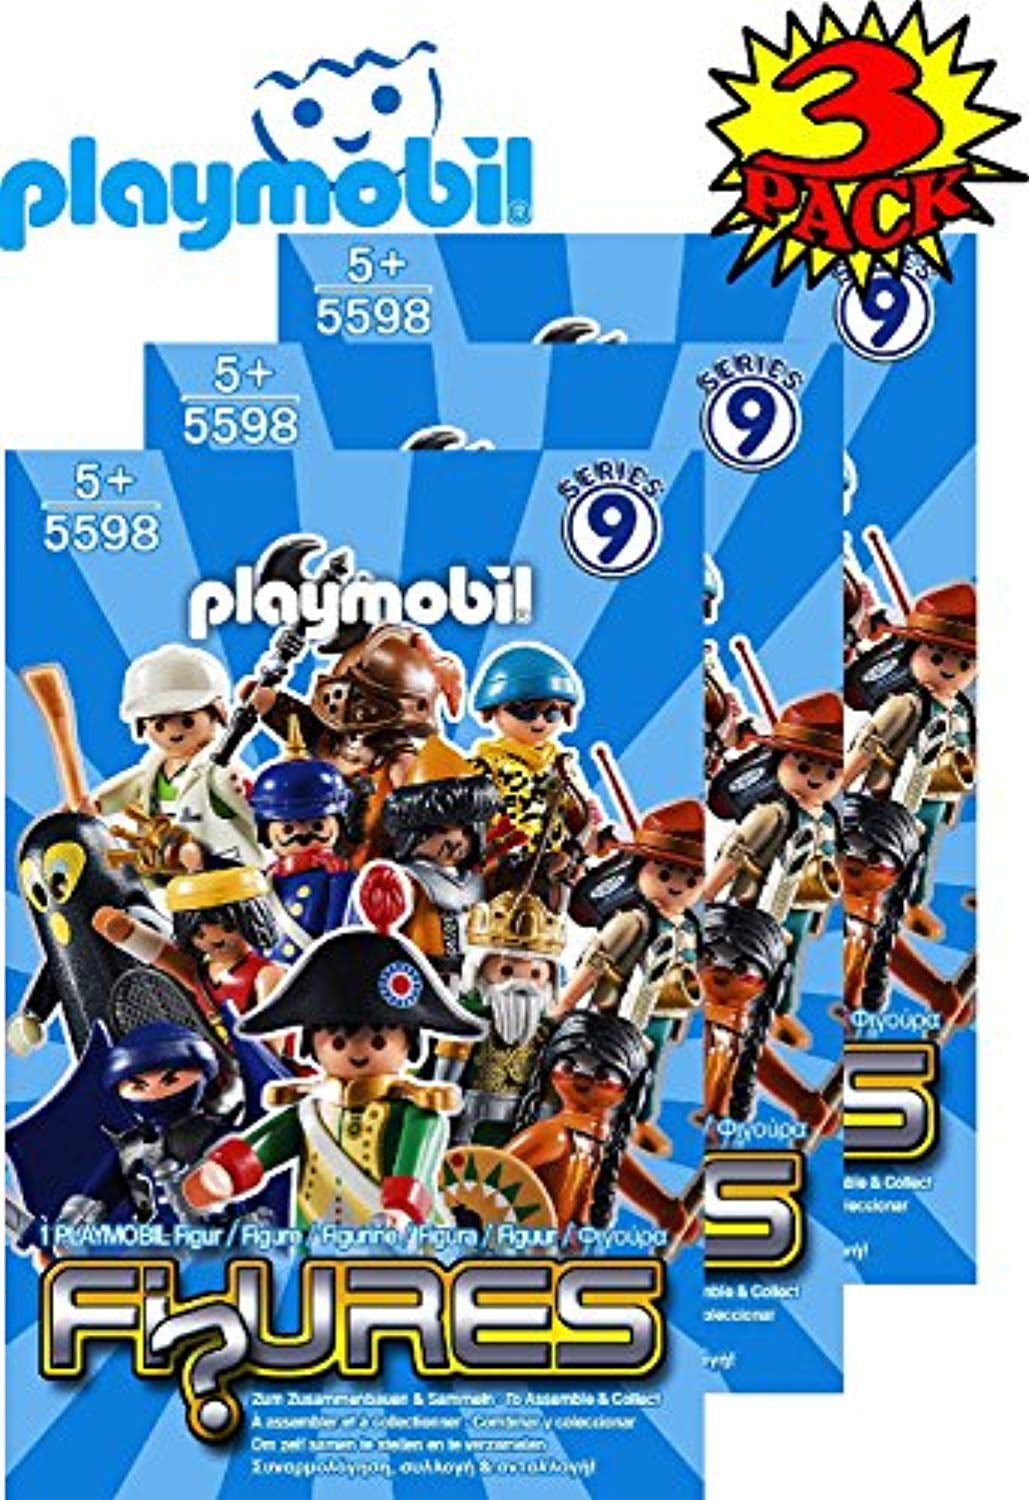 PLAYMOBIL 9443 Figures Packet Boys Series 14 Collectable RARE for sale online 